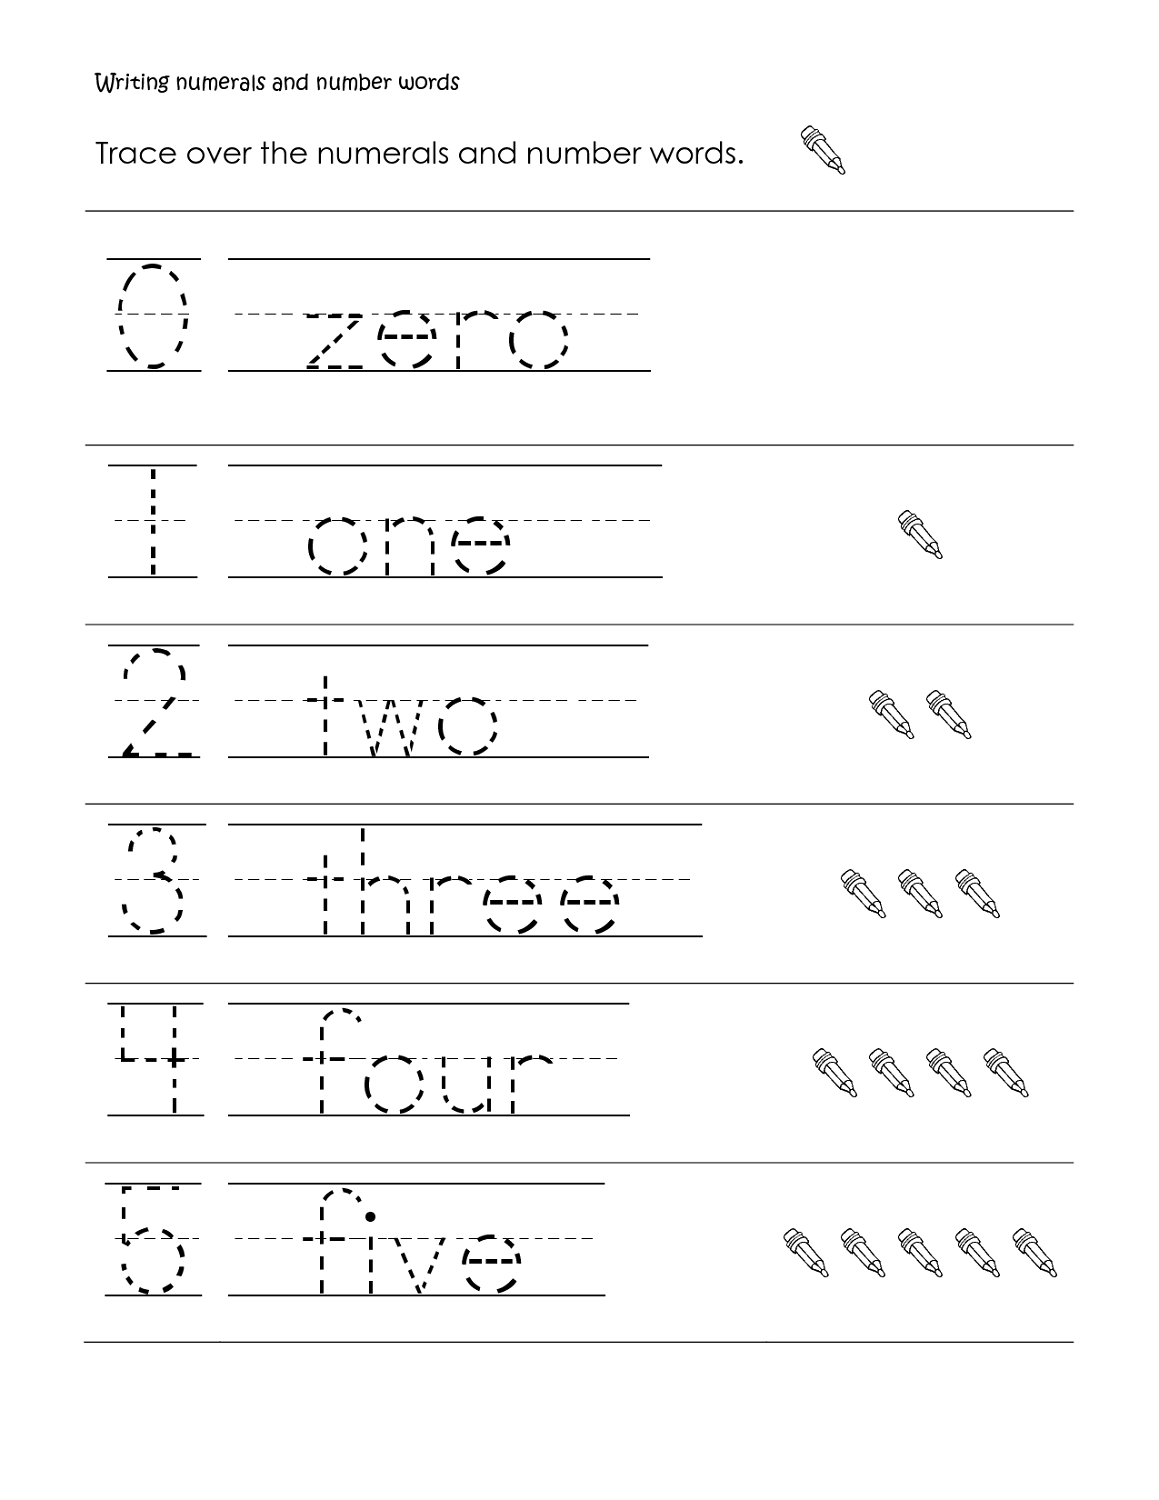 5-best-images-of-writing-numbers-1-20-printables-math-writing-numbers-1-20-free-worksheets